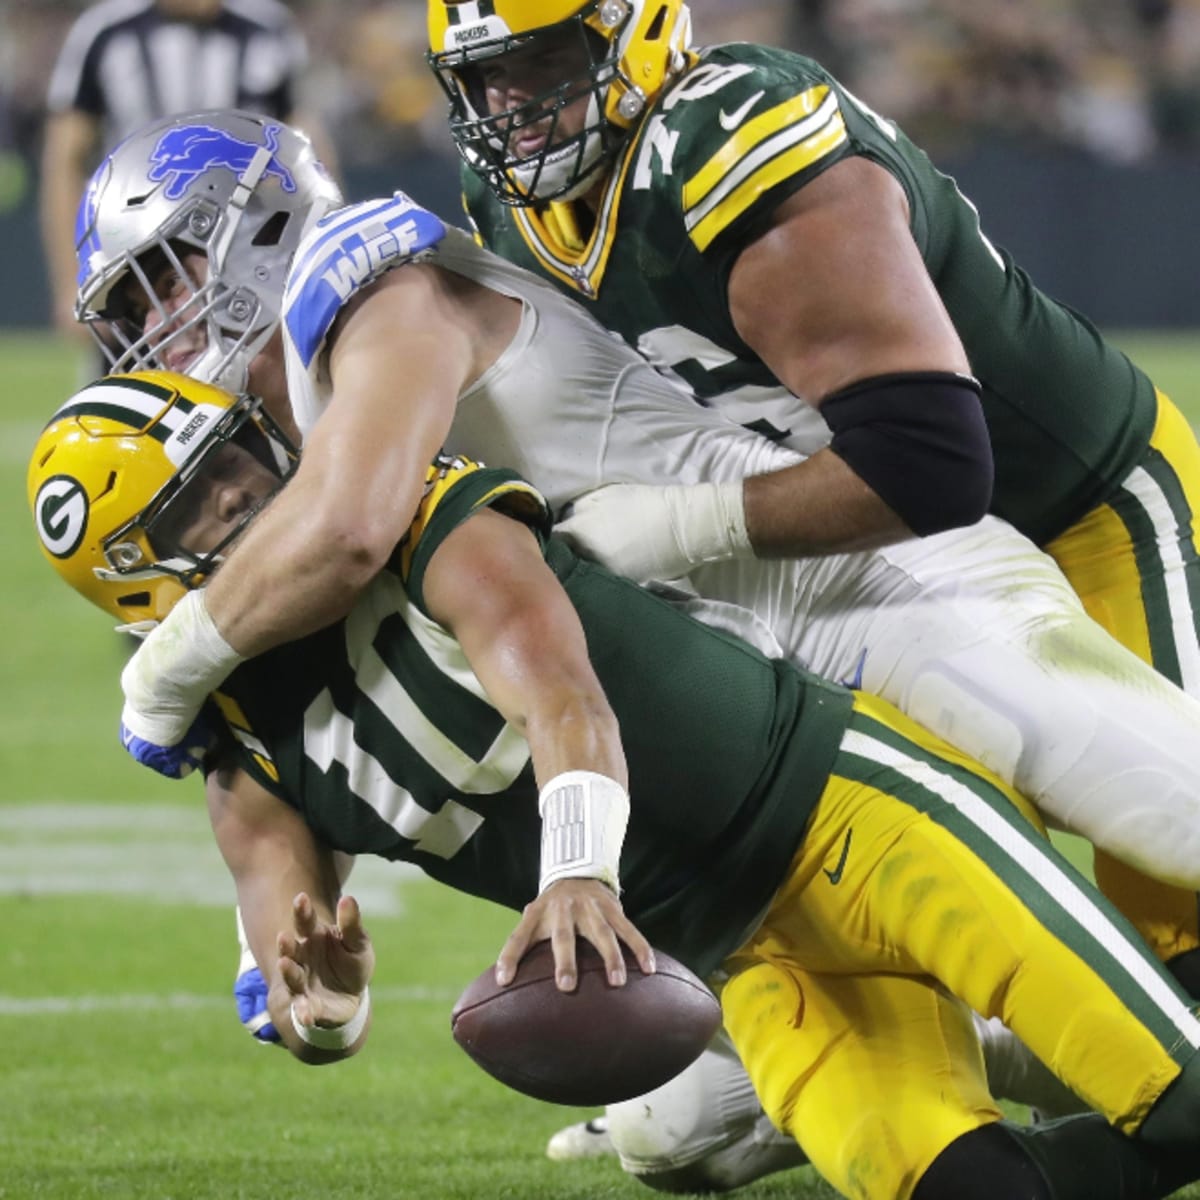 Detroit Lions 34 vs 20 Green Bay Packers summary, stats, score and